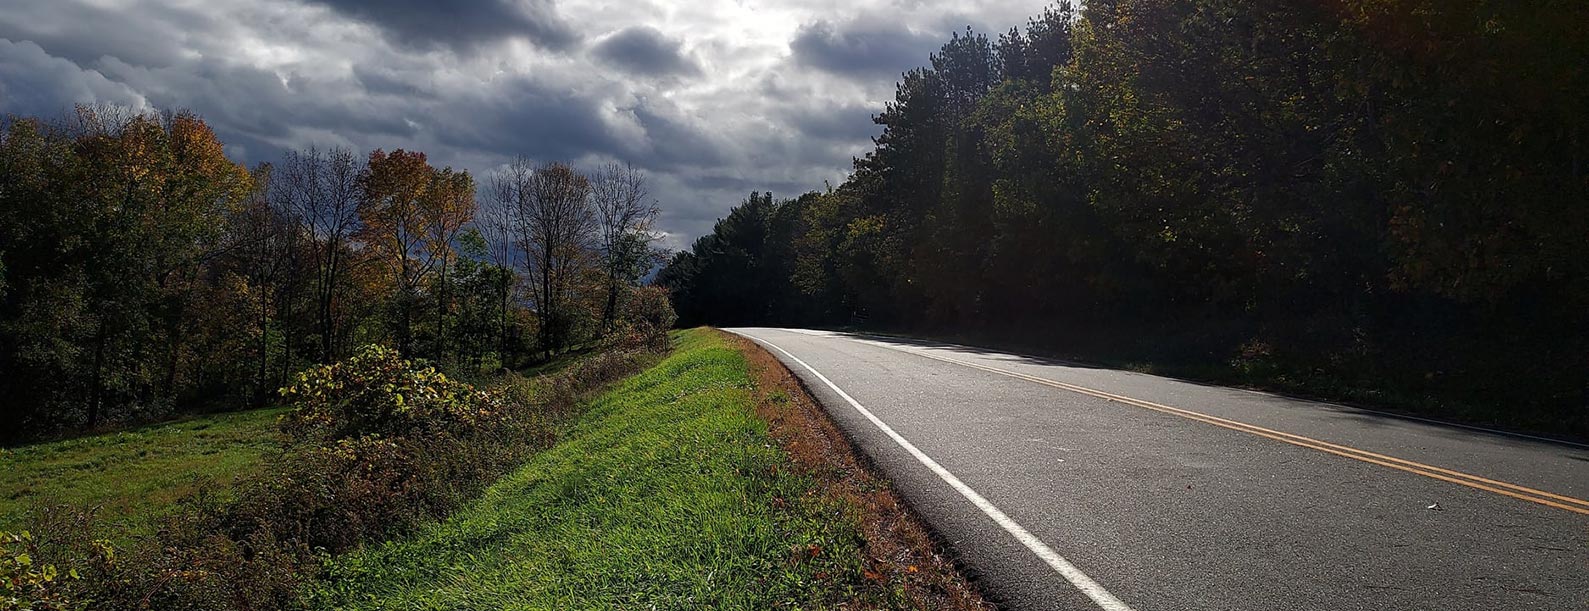 image of country road in frankford township